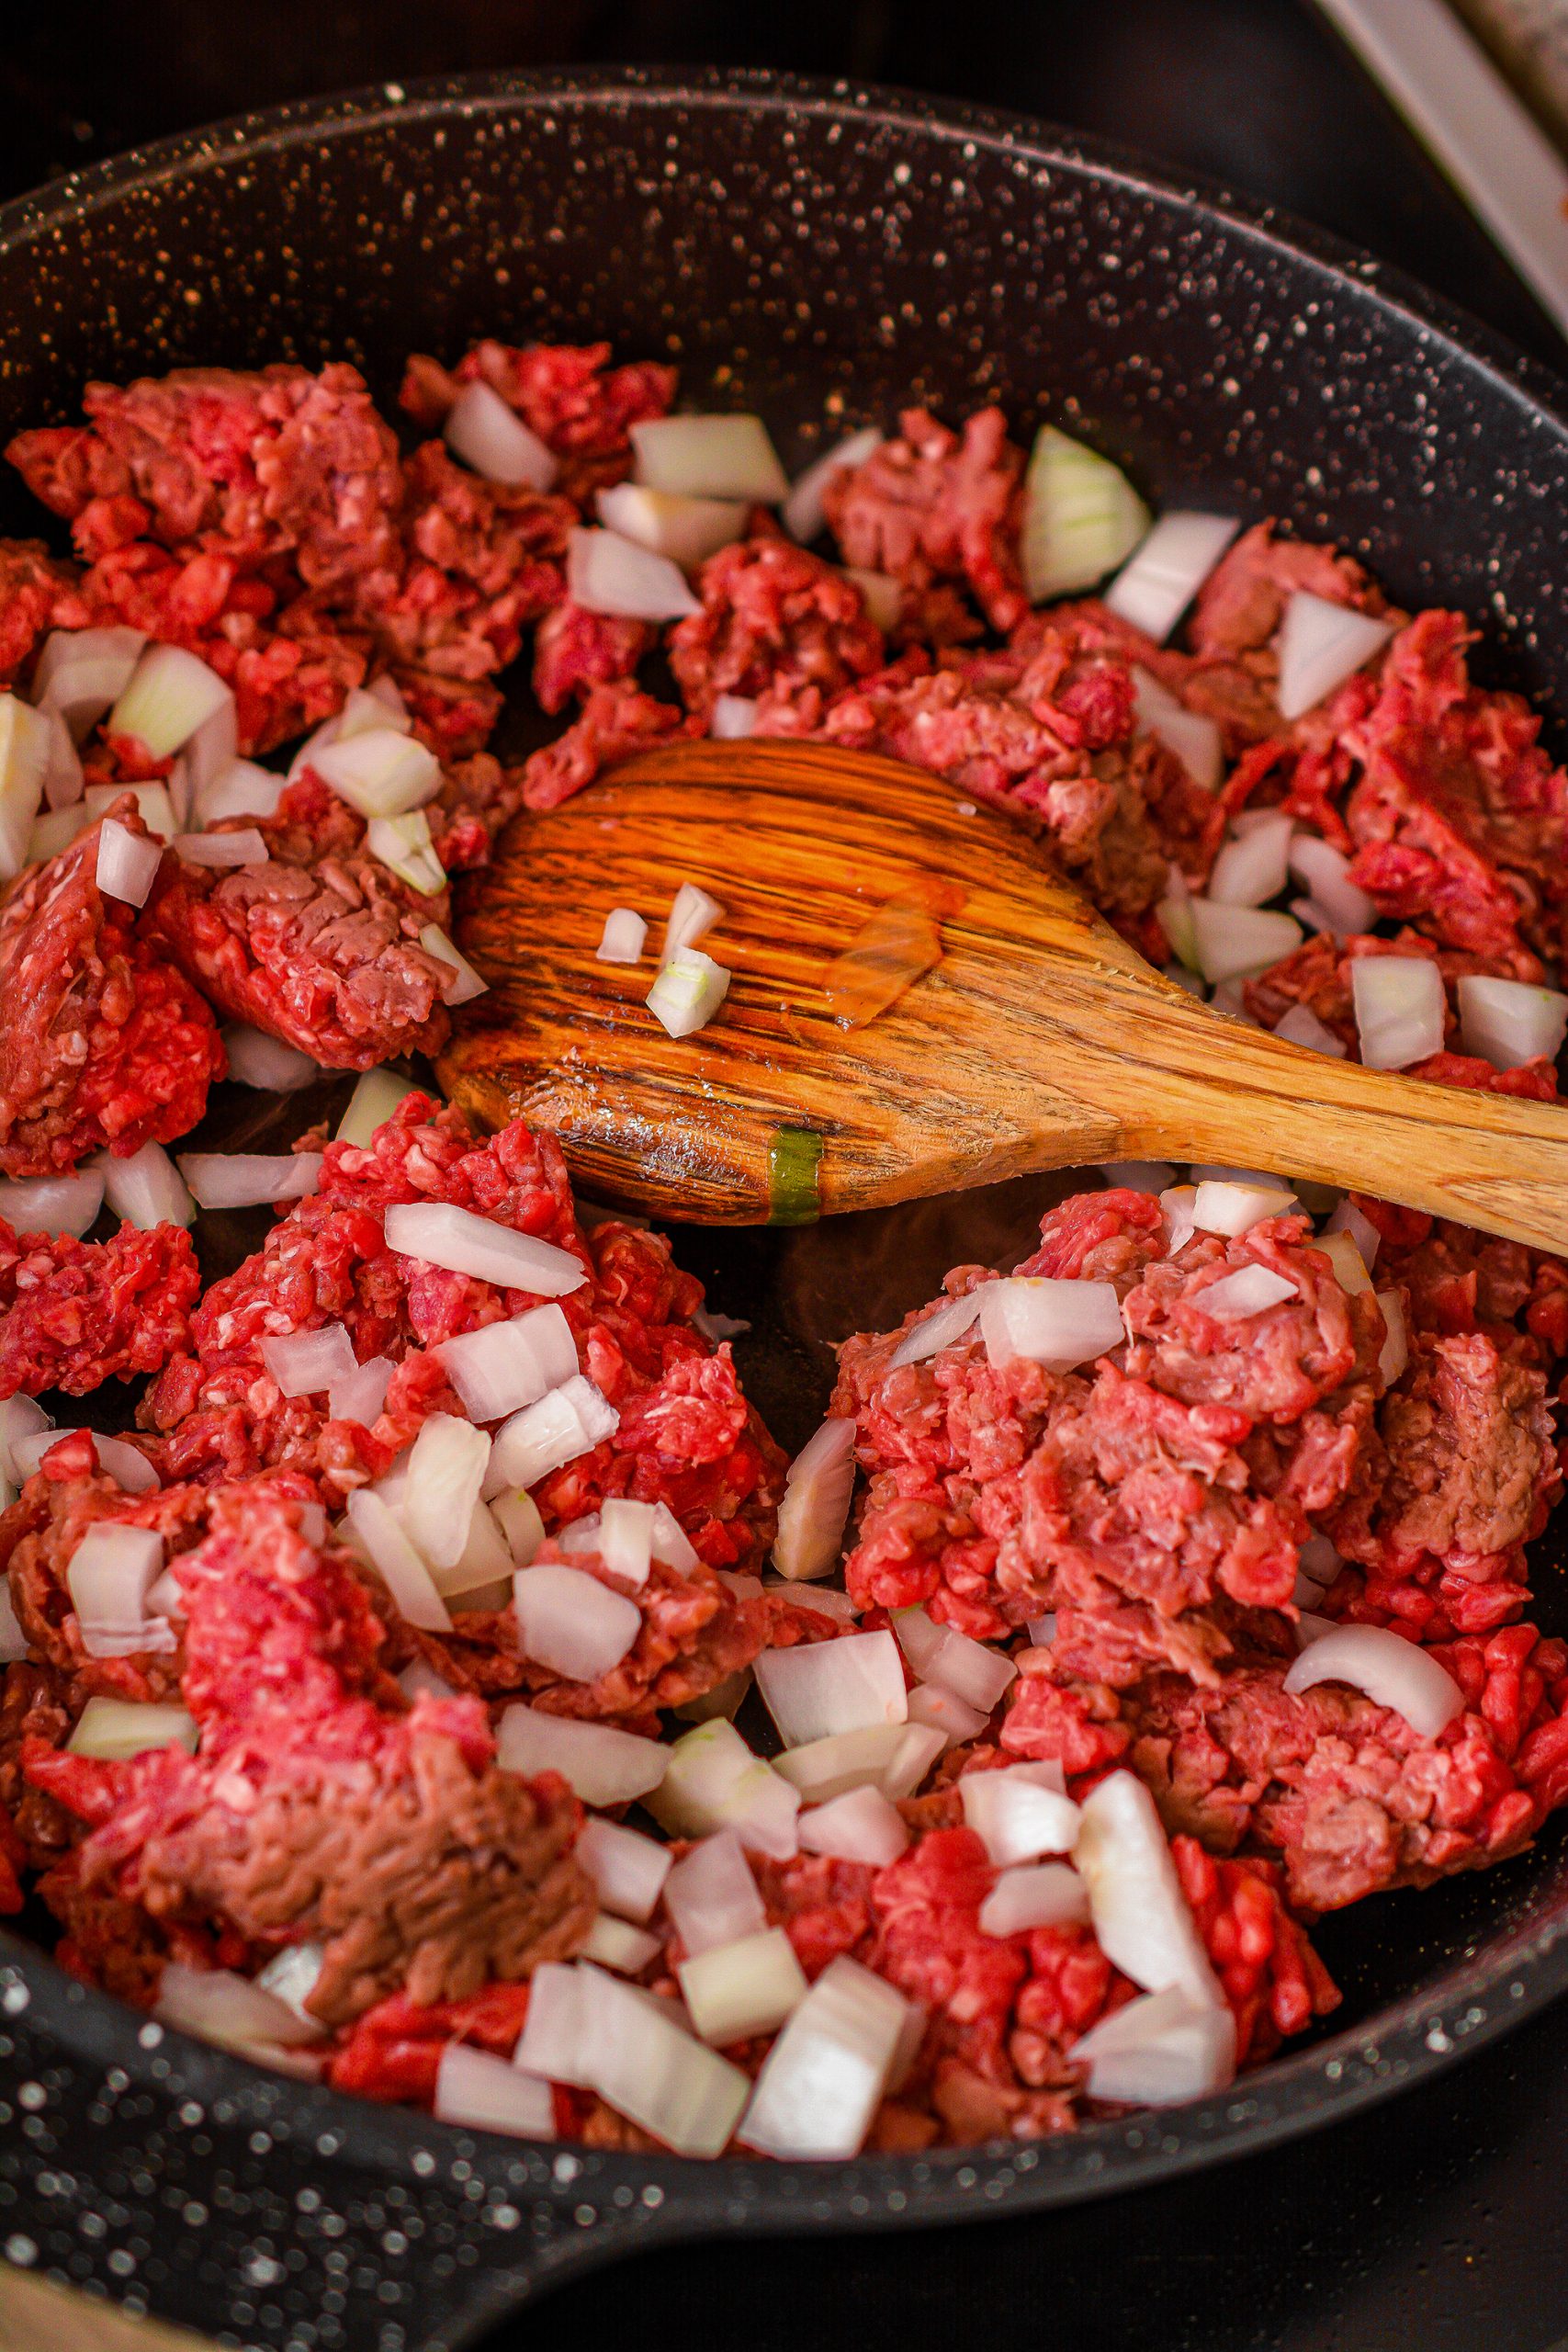 Add the ground beef and onion to a skillet over medium high heat.